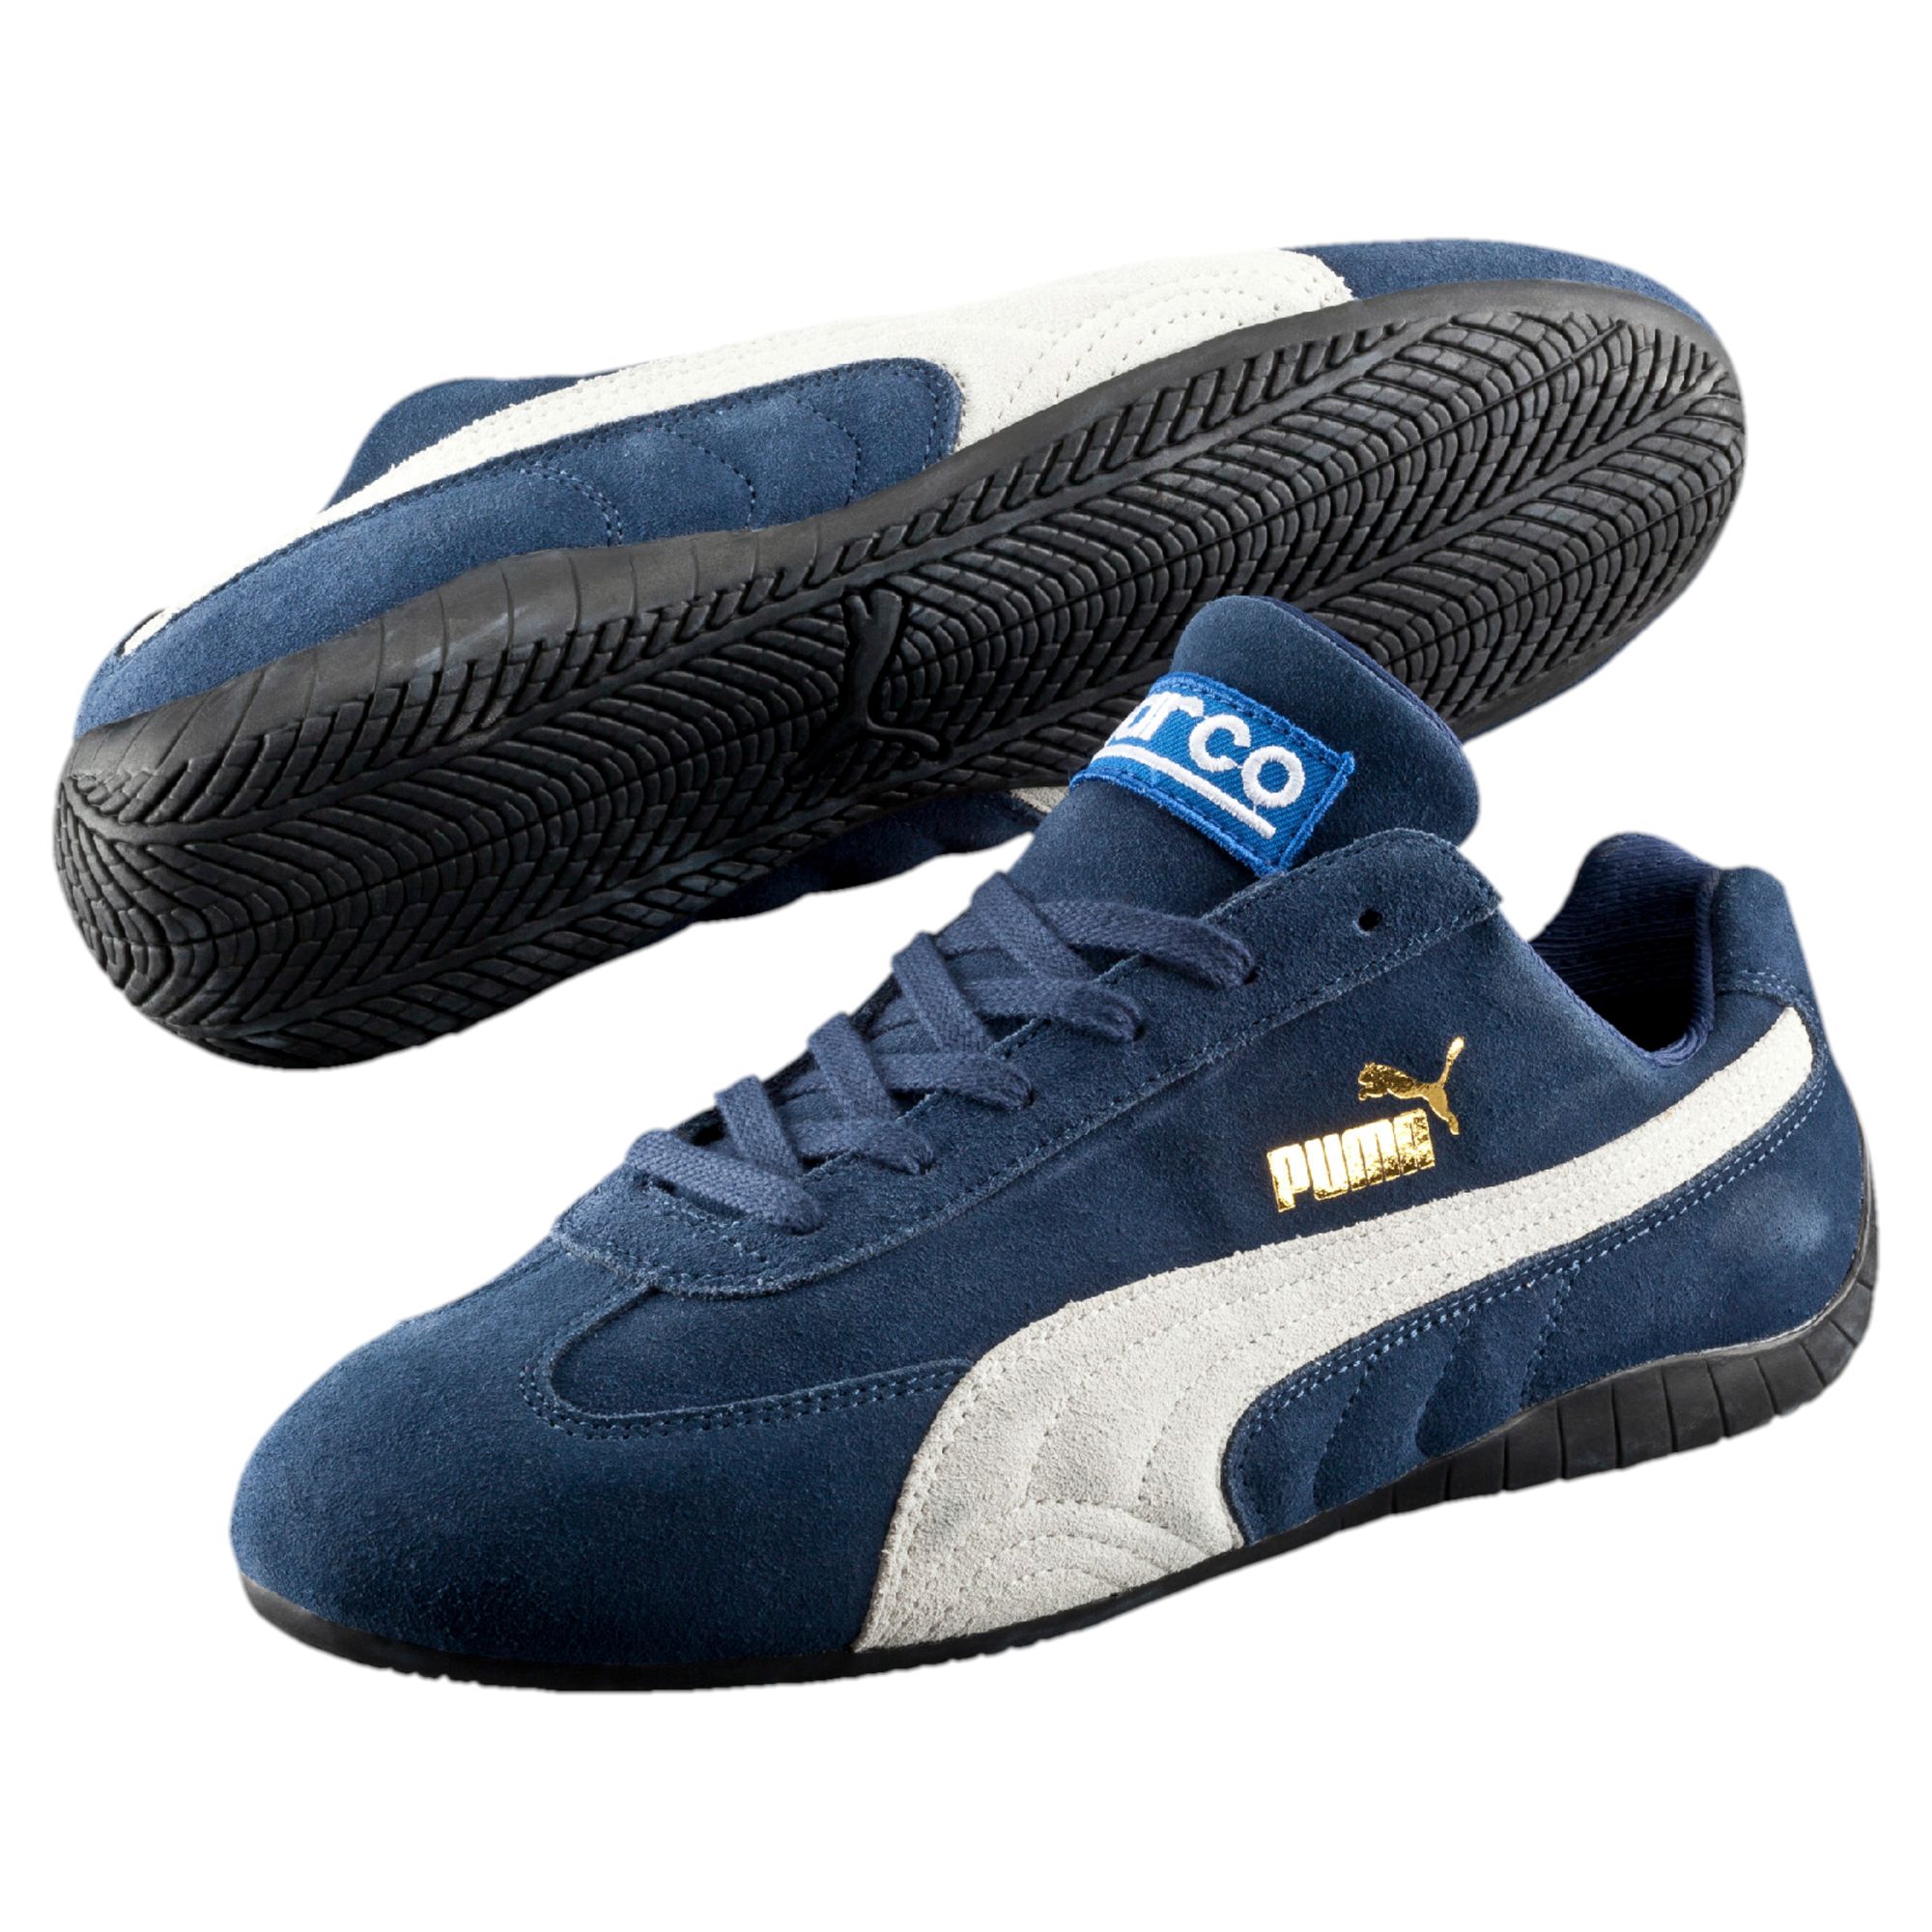 puma speed cat sparco homme